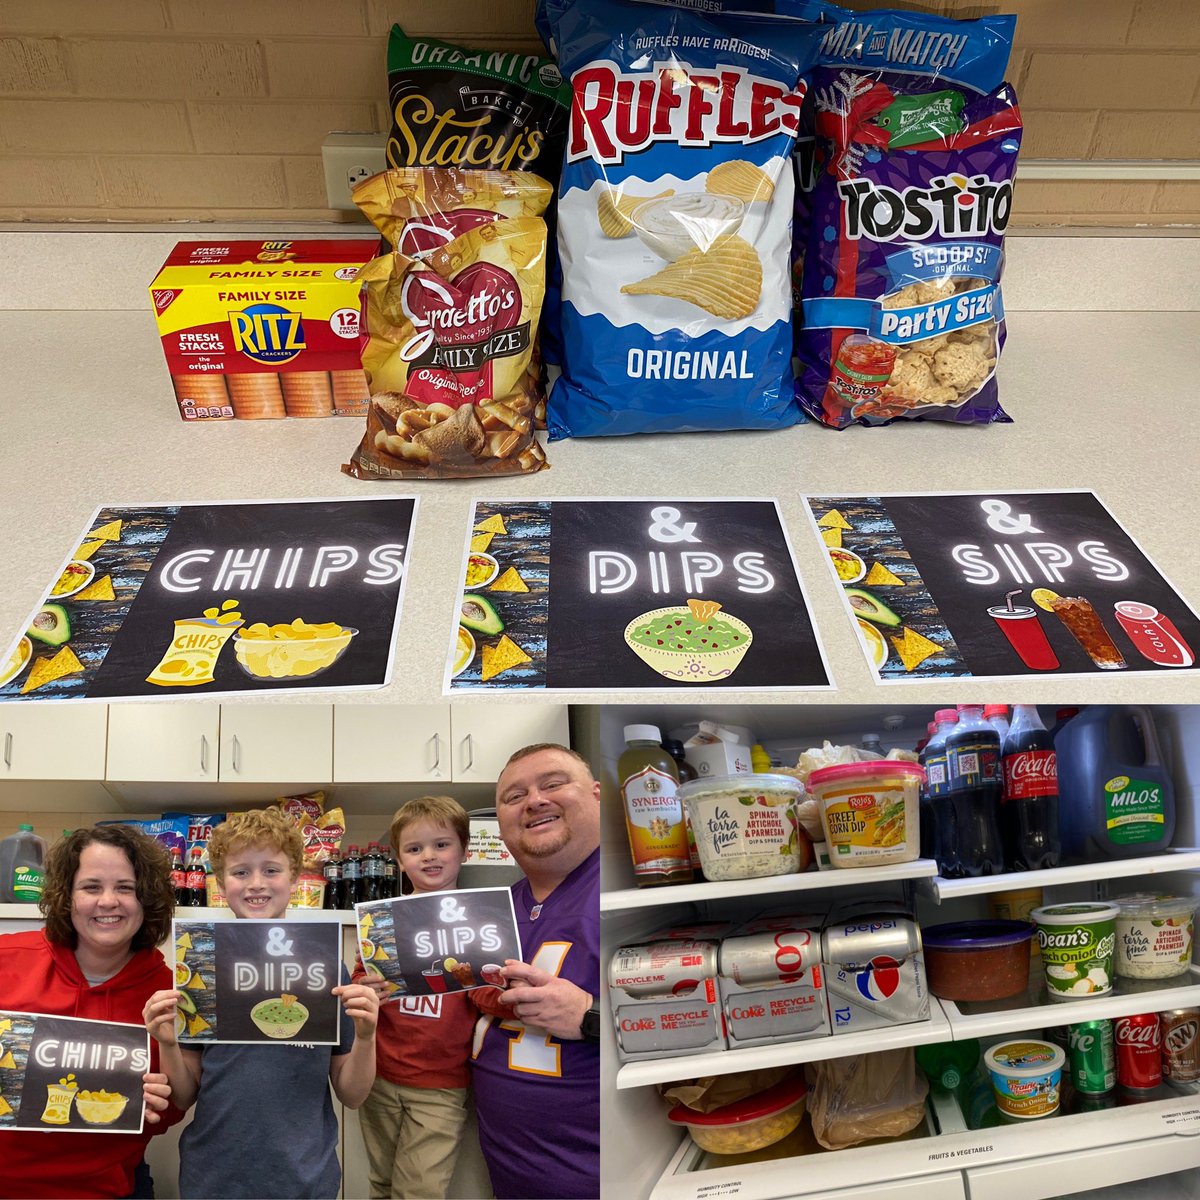 Chips & Dips & Sips ➡️ the fam and I stocked the teacher’s lounge yesterday! This was the most popular stock last year so it was time for it to make its reappearance. It’s my fav to shop for too! #Pitzer2a #LWRockets #momsasprincipals #PrincipalOfficeHours #principalsinaction